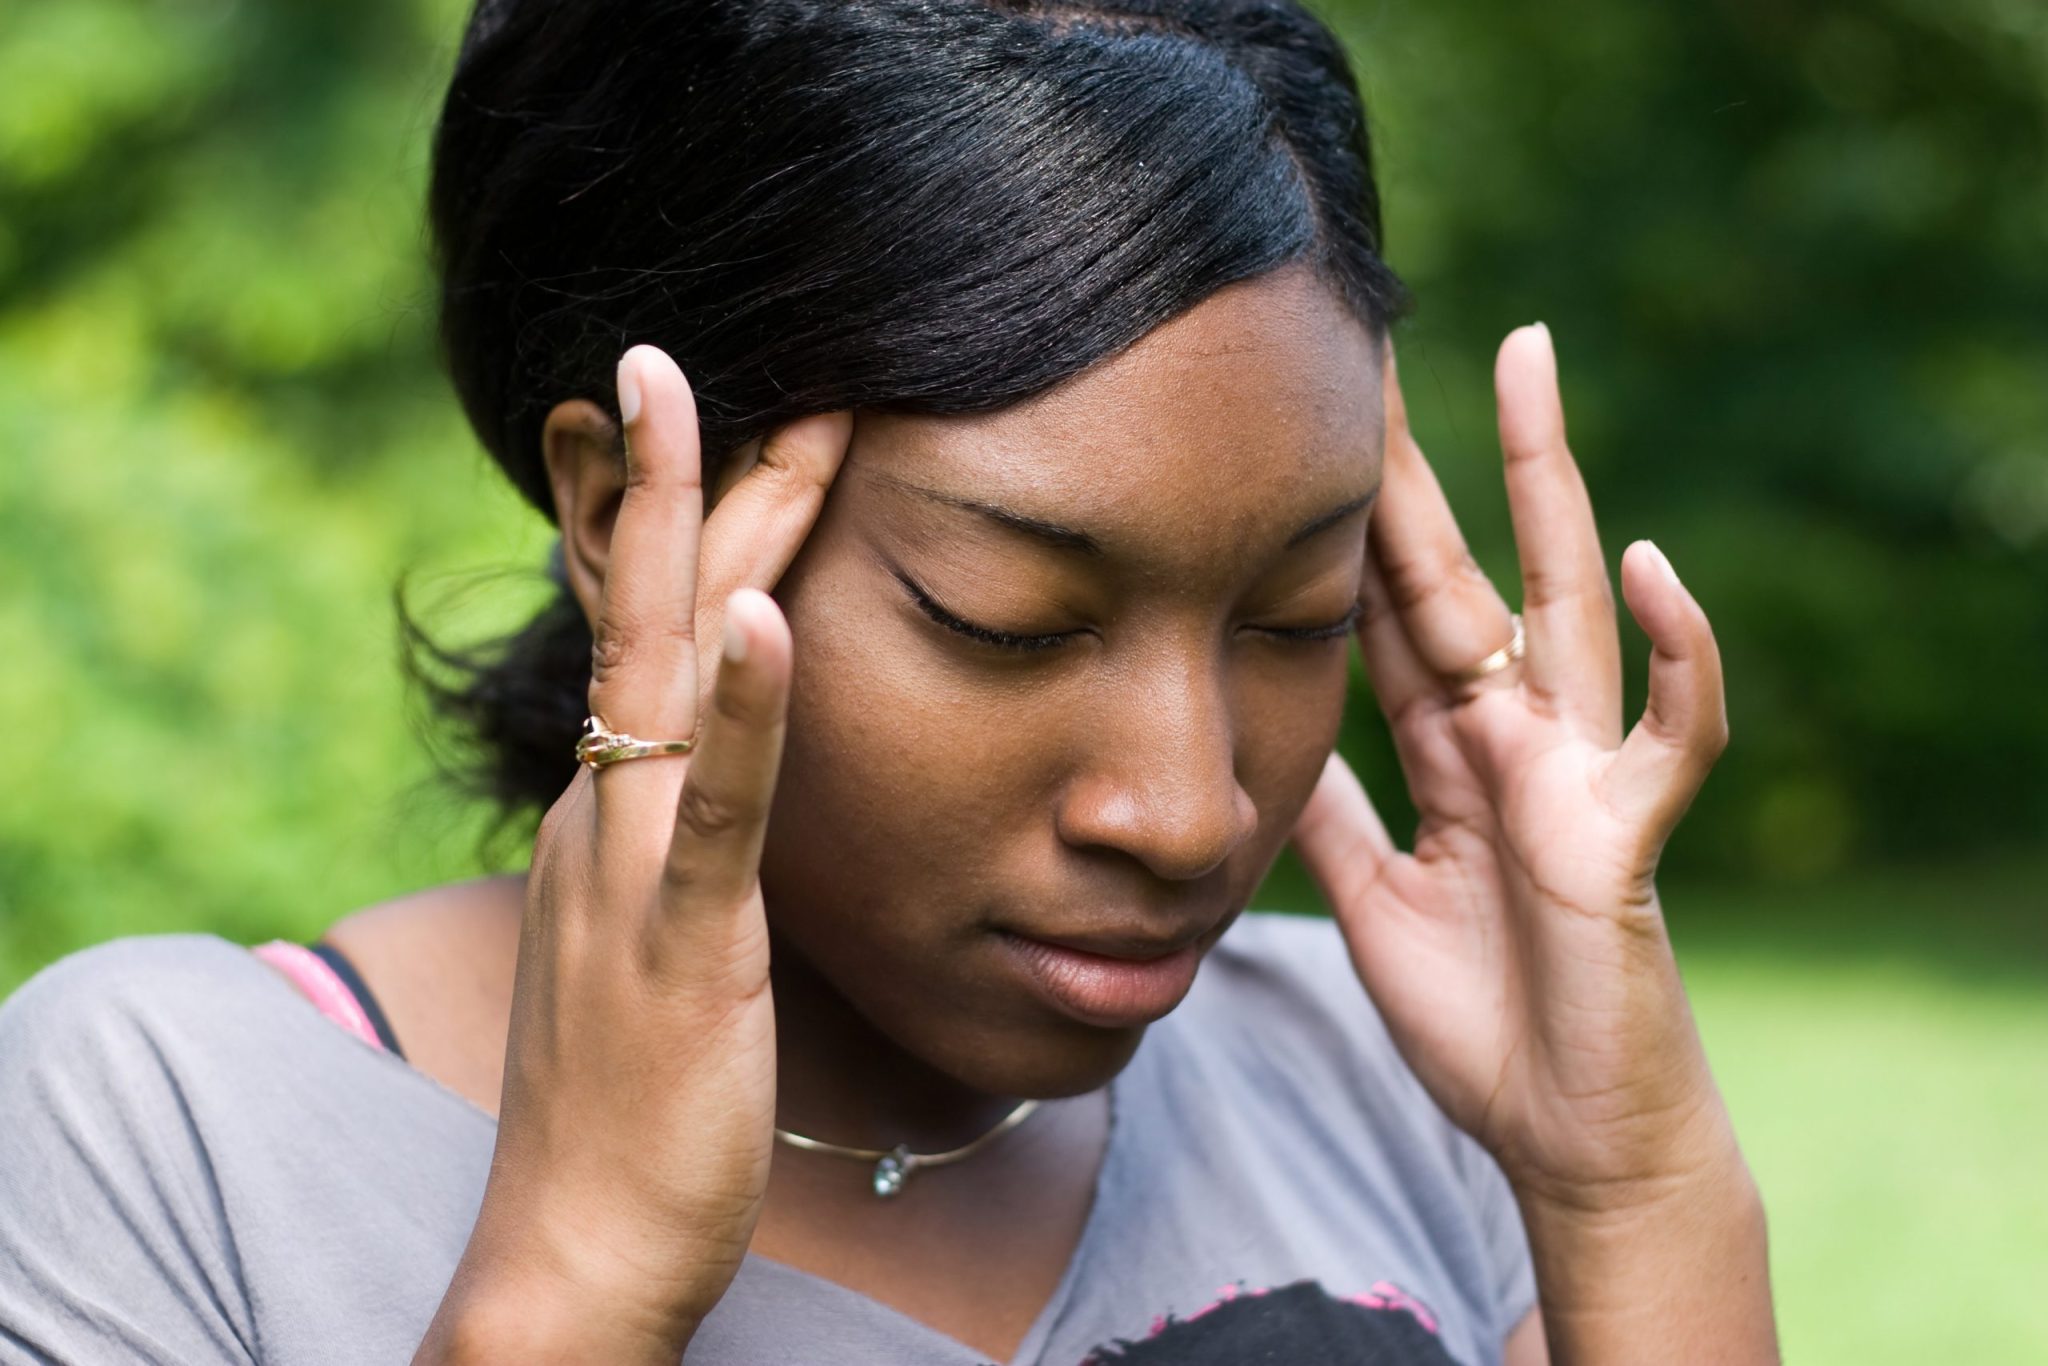 This young woman is experiencing intense stress or pain from a splitting headache.